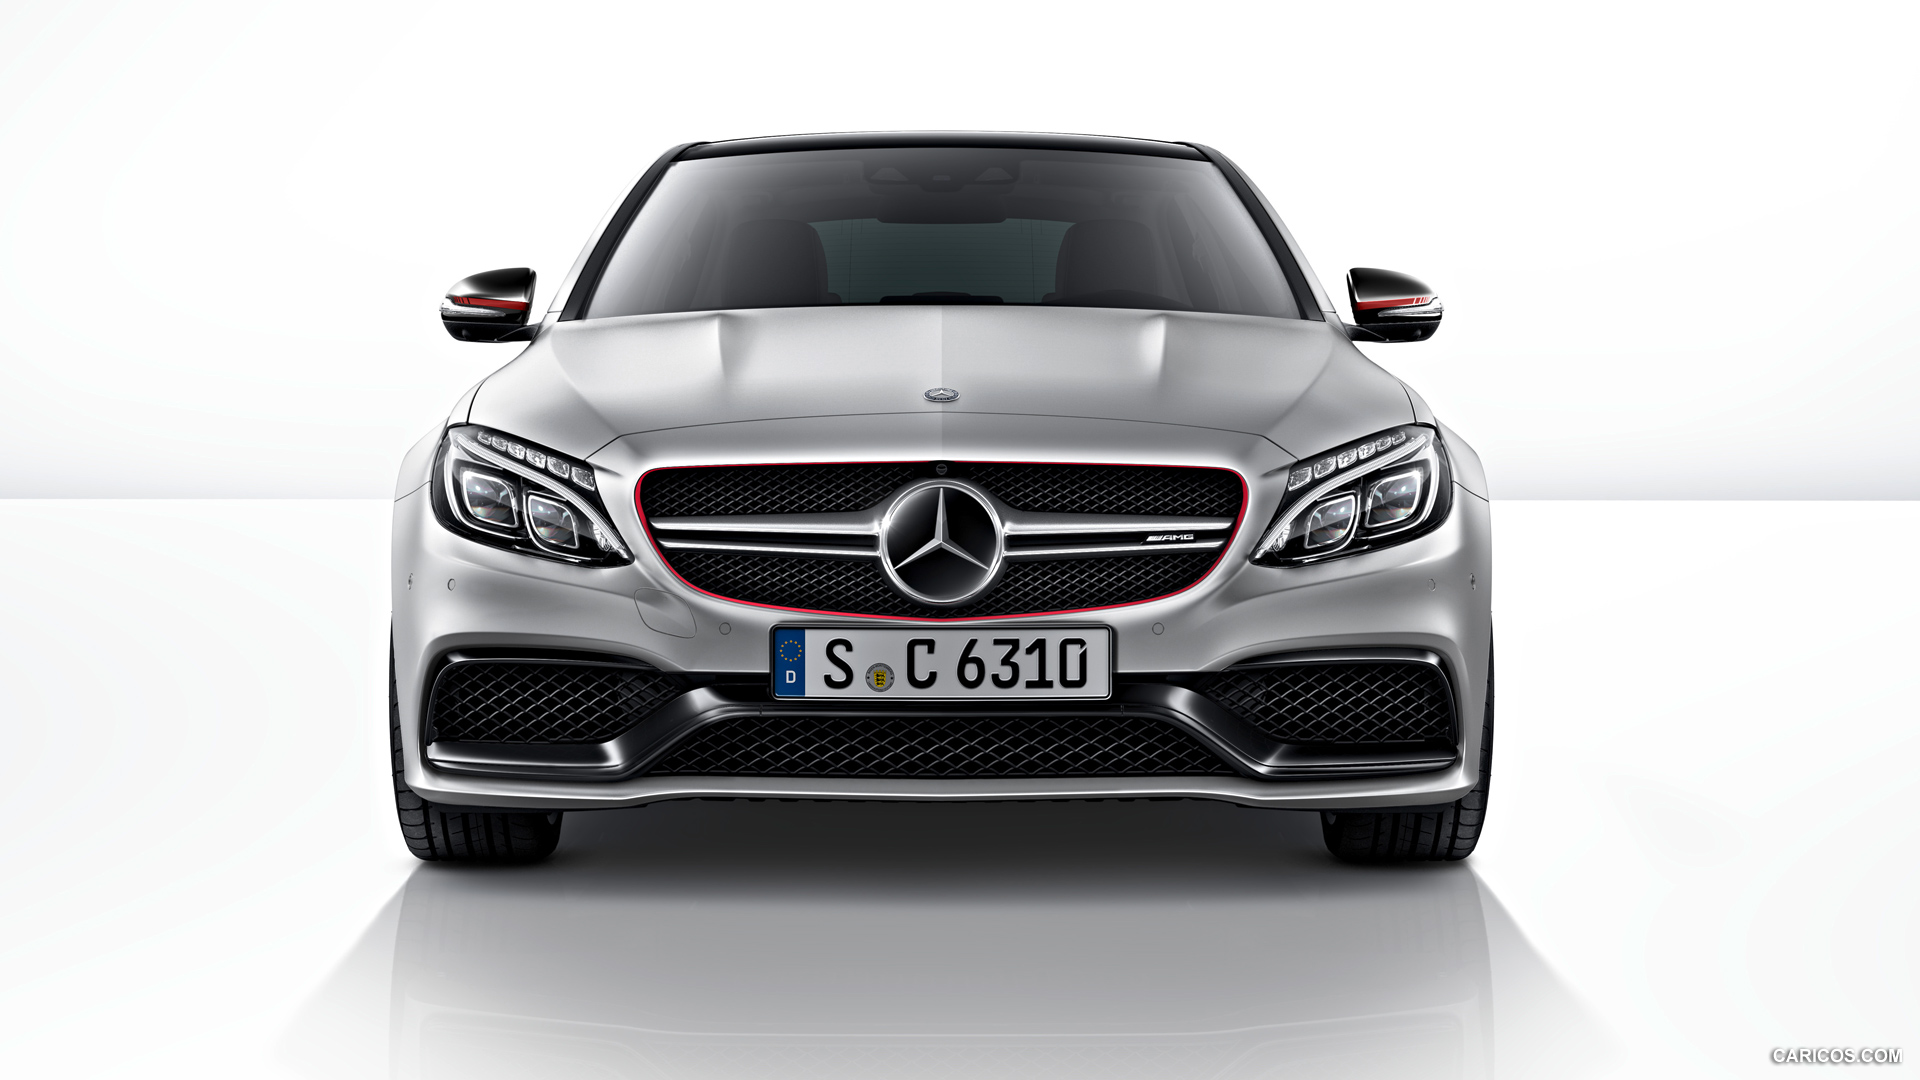 File:Mercedes-AMG C63 S Edition 1 (W205) front.JPG - Wikimedia Commons